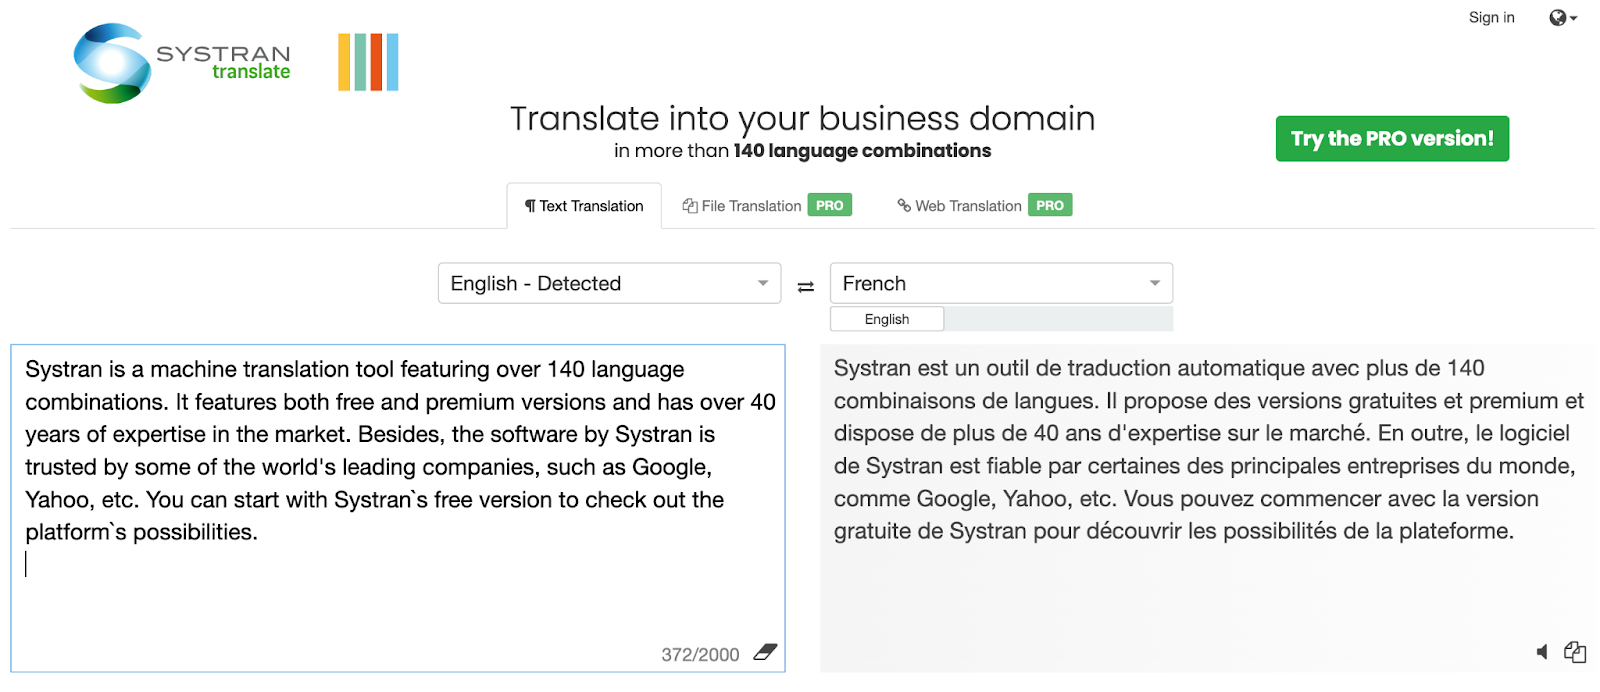 A screenshot of the Systran translation interface